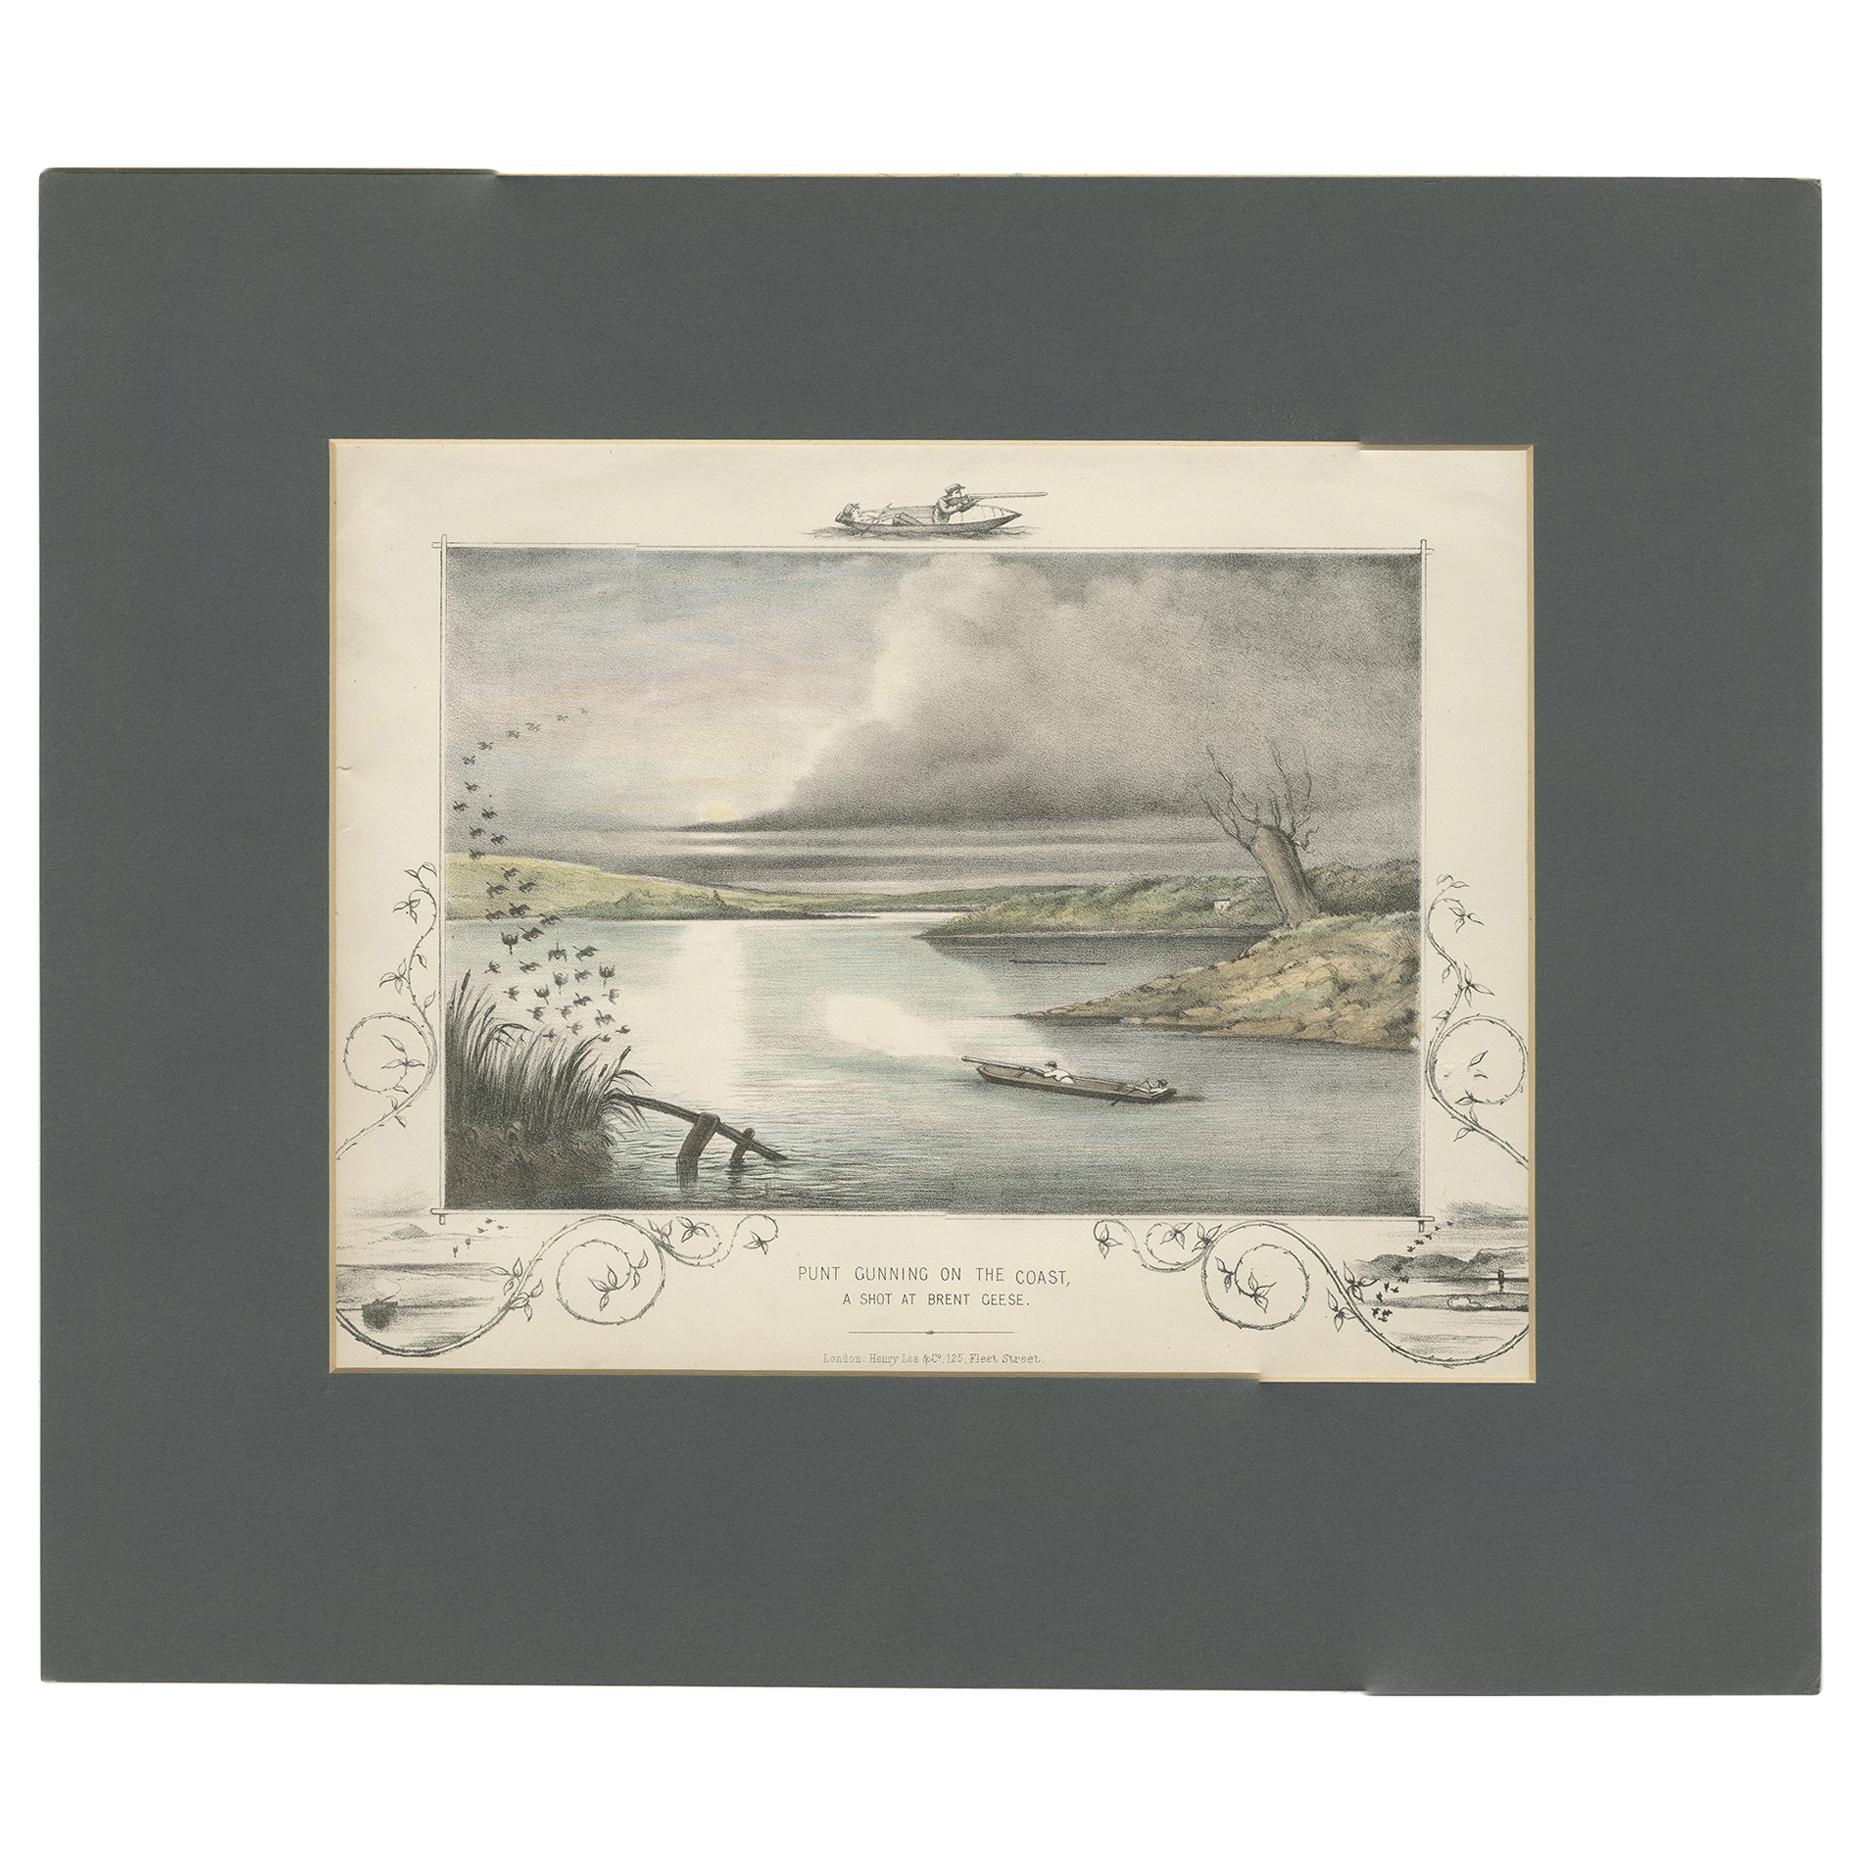 Antique Hunting Print of a shot at Brent Geese, circa 1863